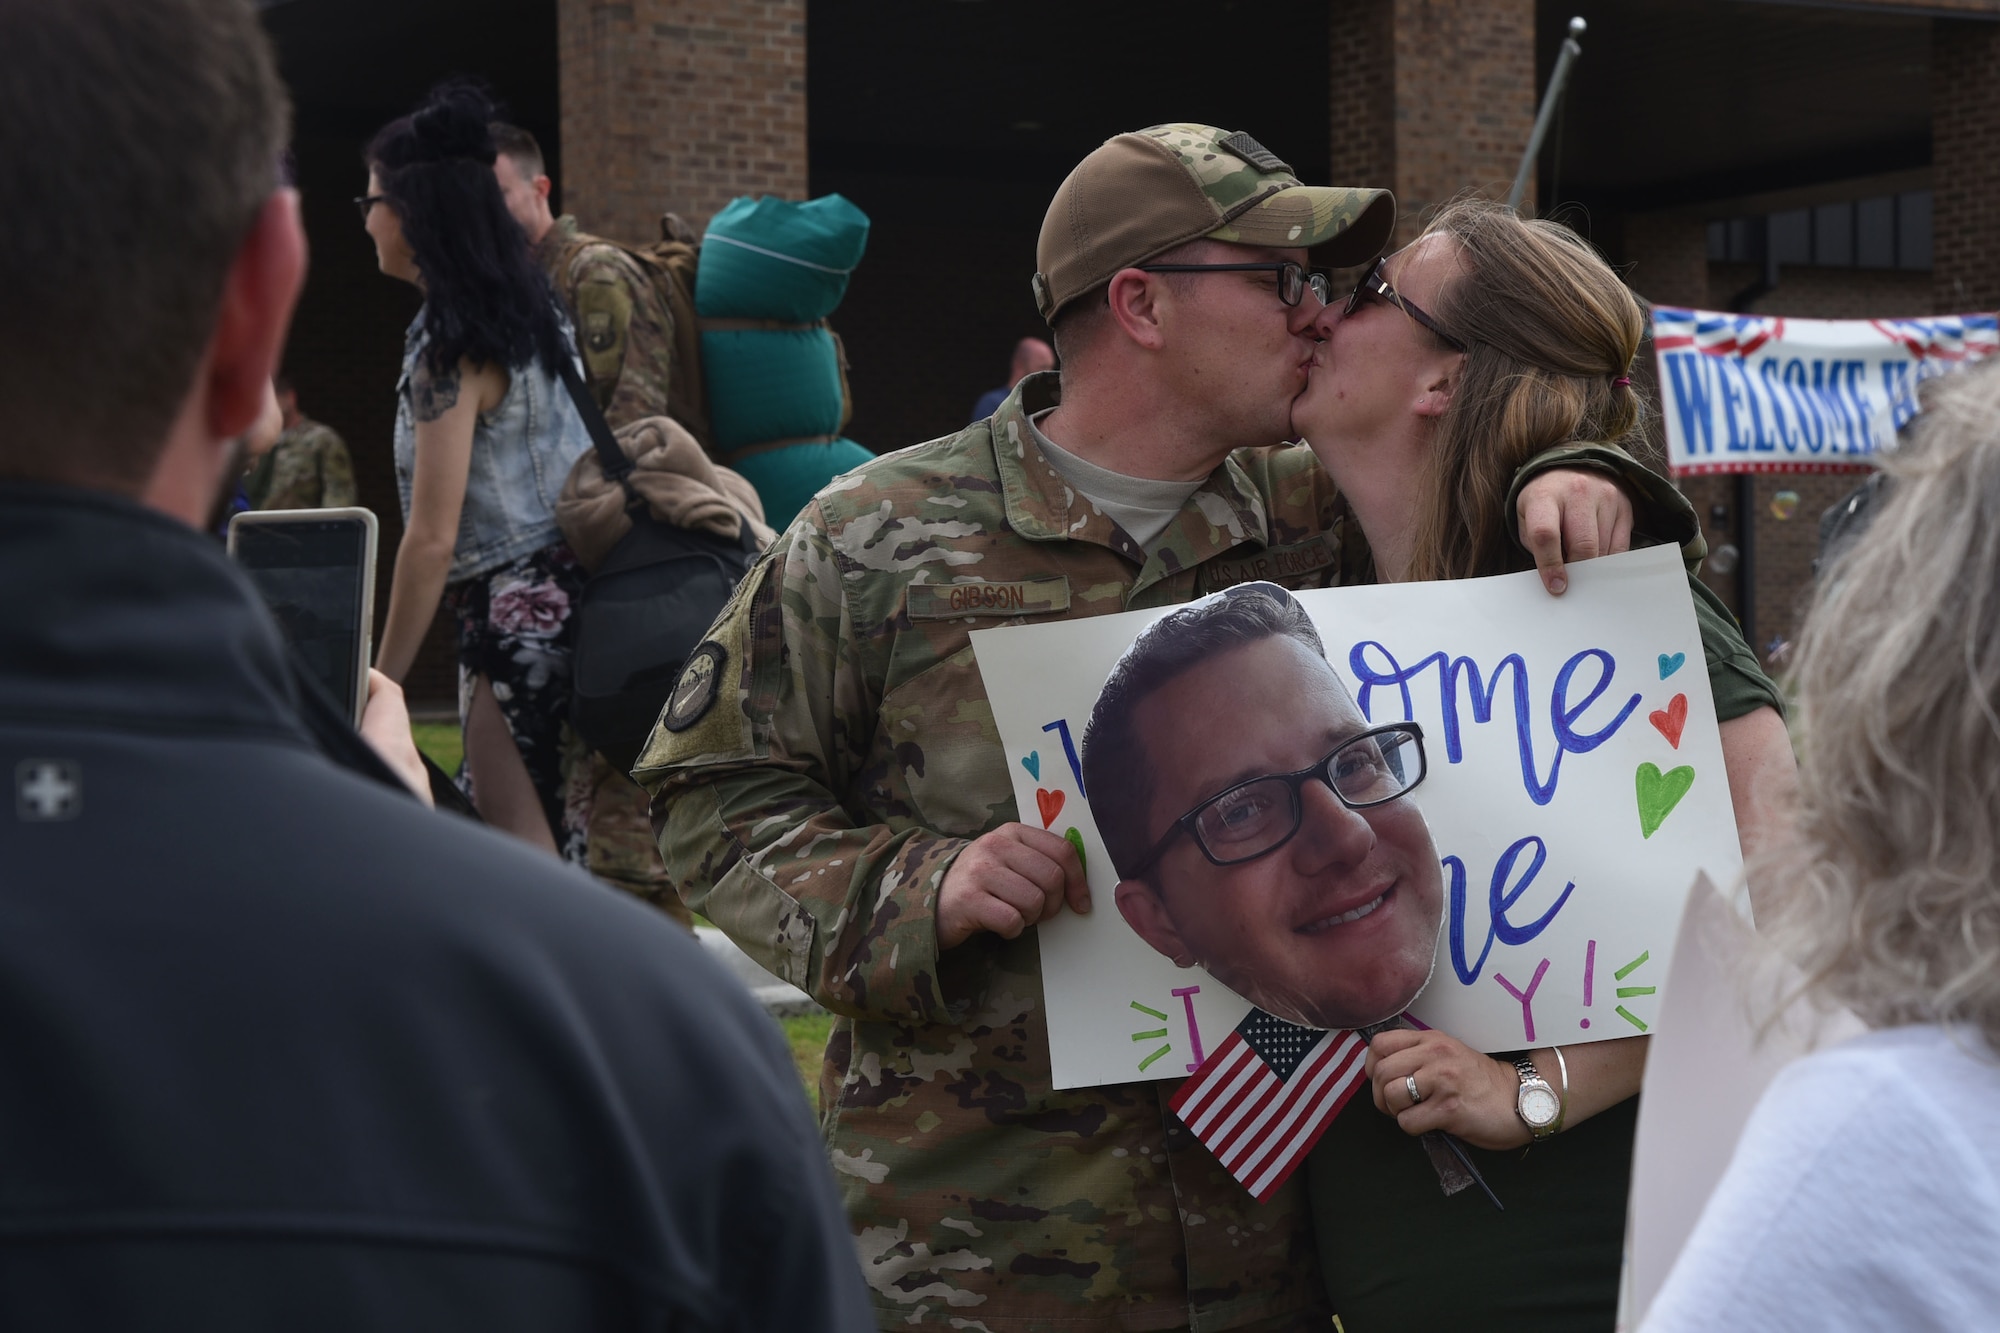 U.S. Air Force Reserve Tech. Sgt. Richard Gibson, 913th Maintenance Squadron crew chief, kisses his wife after returning from deployment at Little Rock Air Force Base, Arkansas, May 19, 2019.